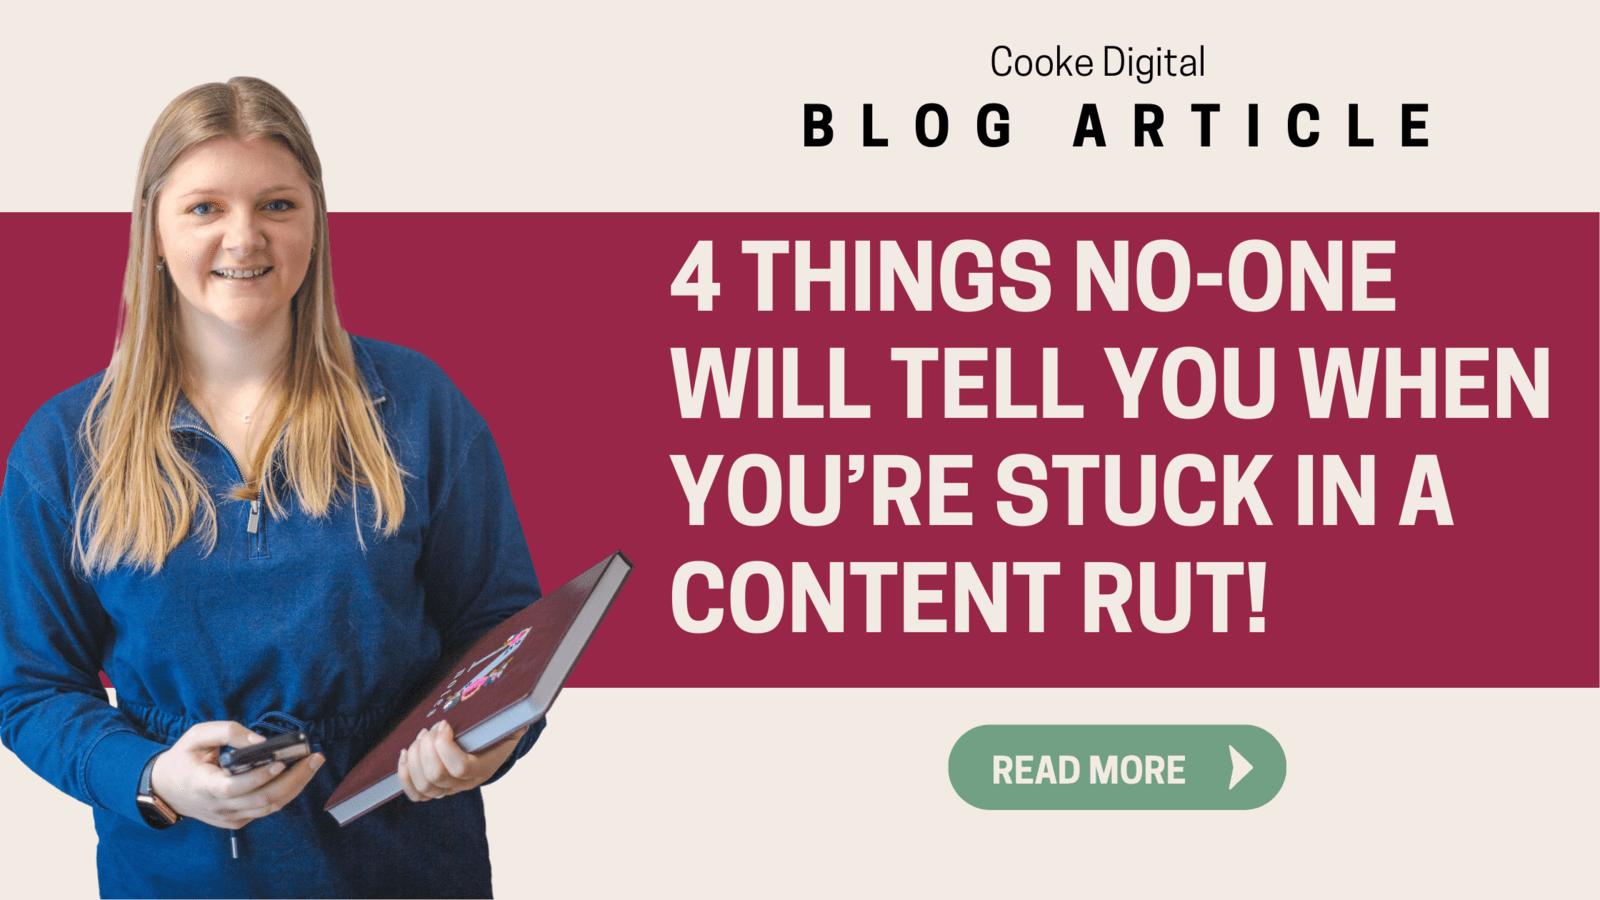 4 things no-one will tell you when you're stuck in a content rut!